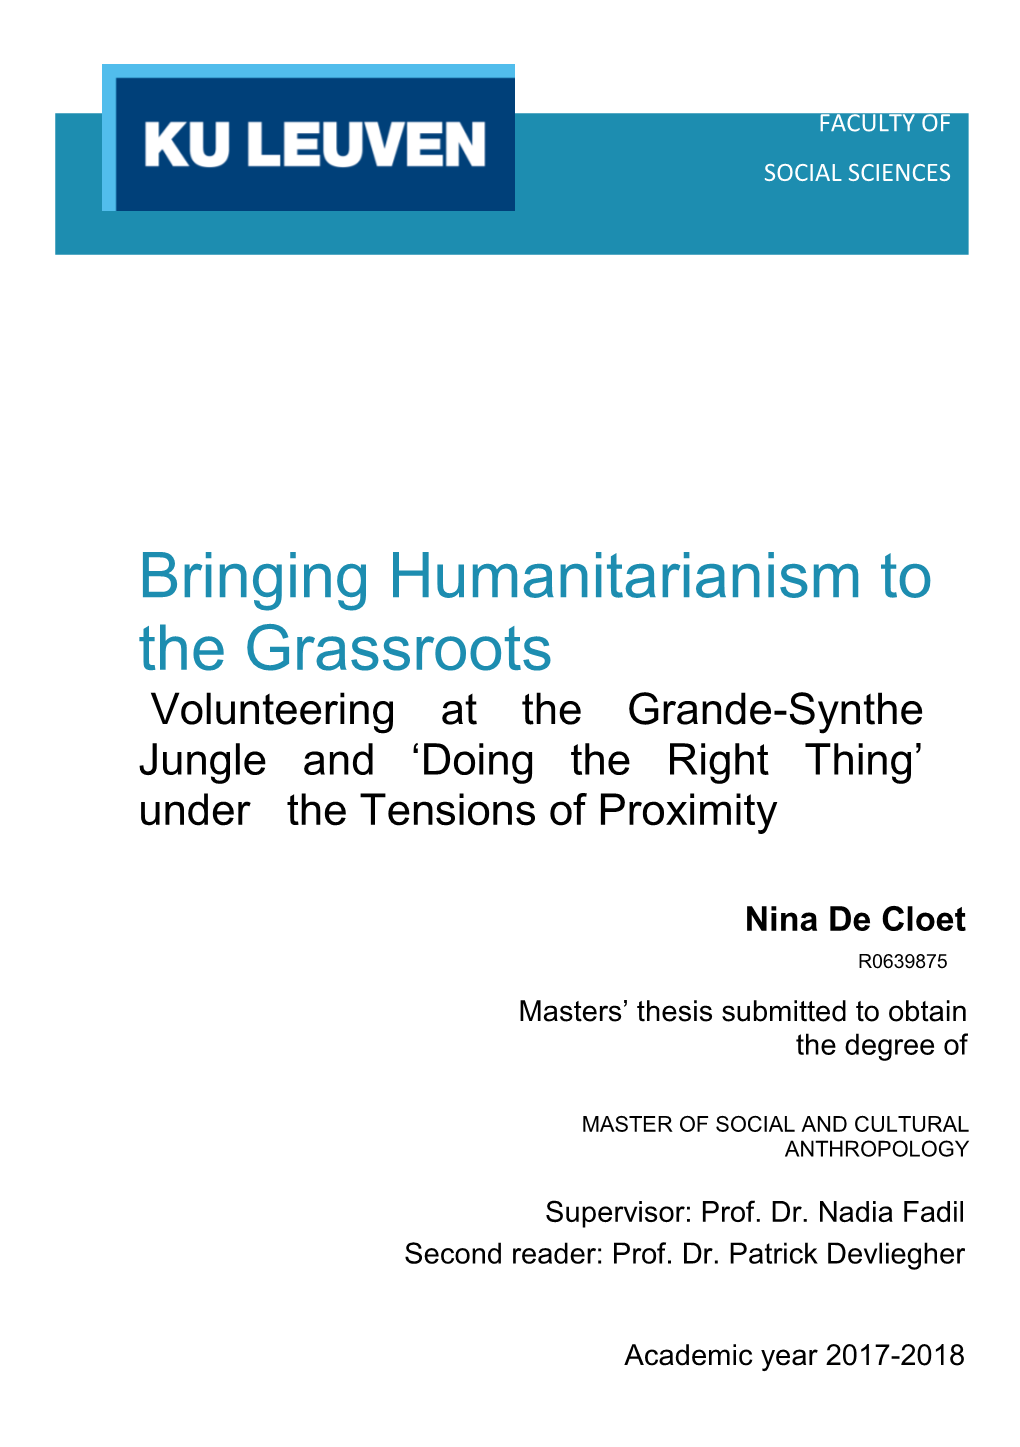 Bringing Humanitarianism to the Grassroots Volunteering at the Grande-Synthe Jungle and ‘Doing the Right Thing’ Under the Tensions of Proximity